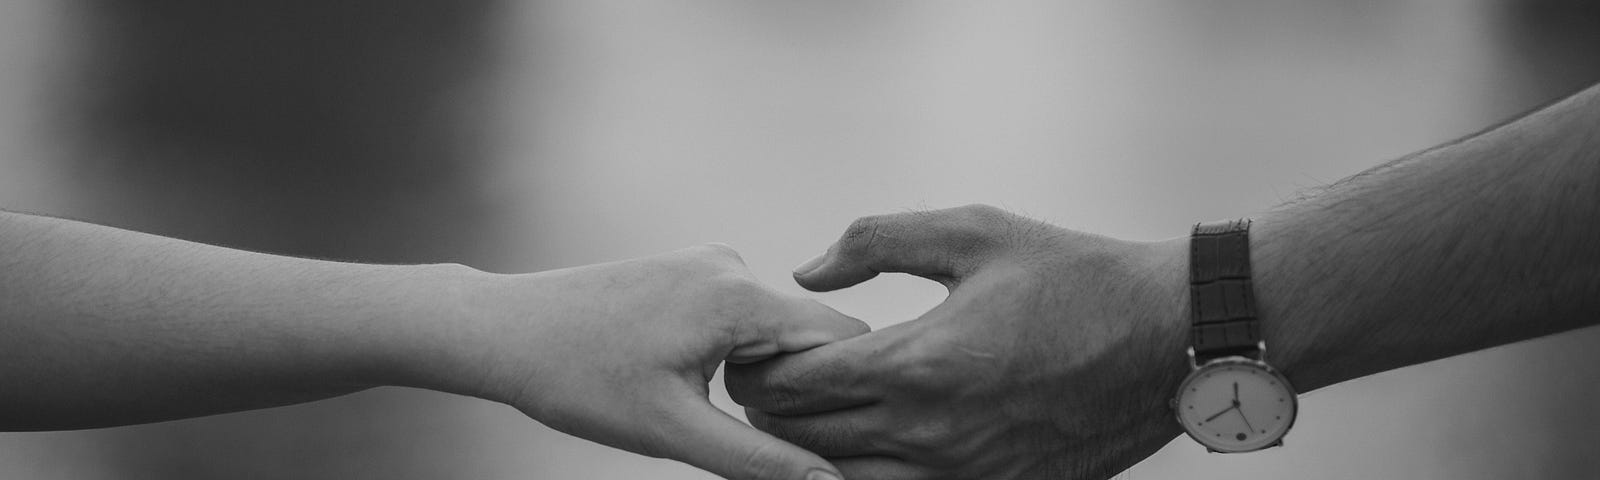 A close-up black and white photo of two people lightly holding hands